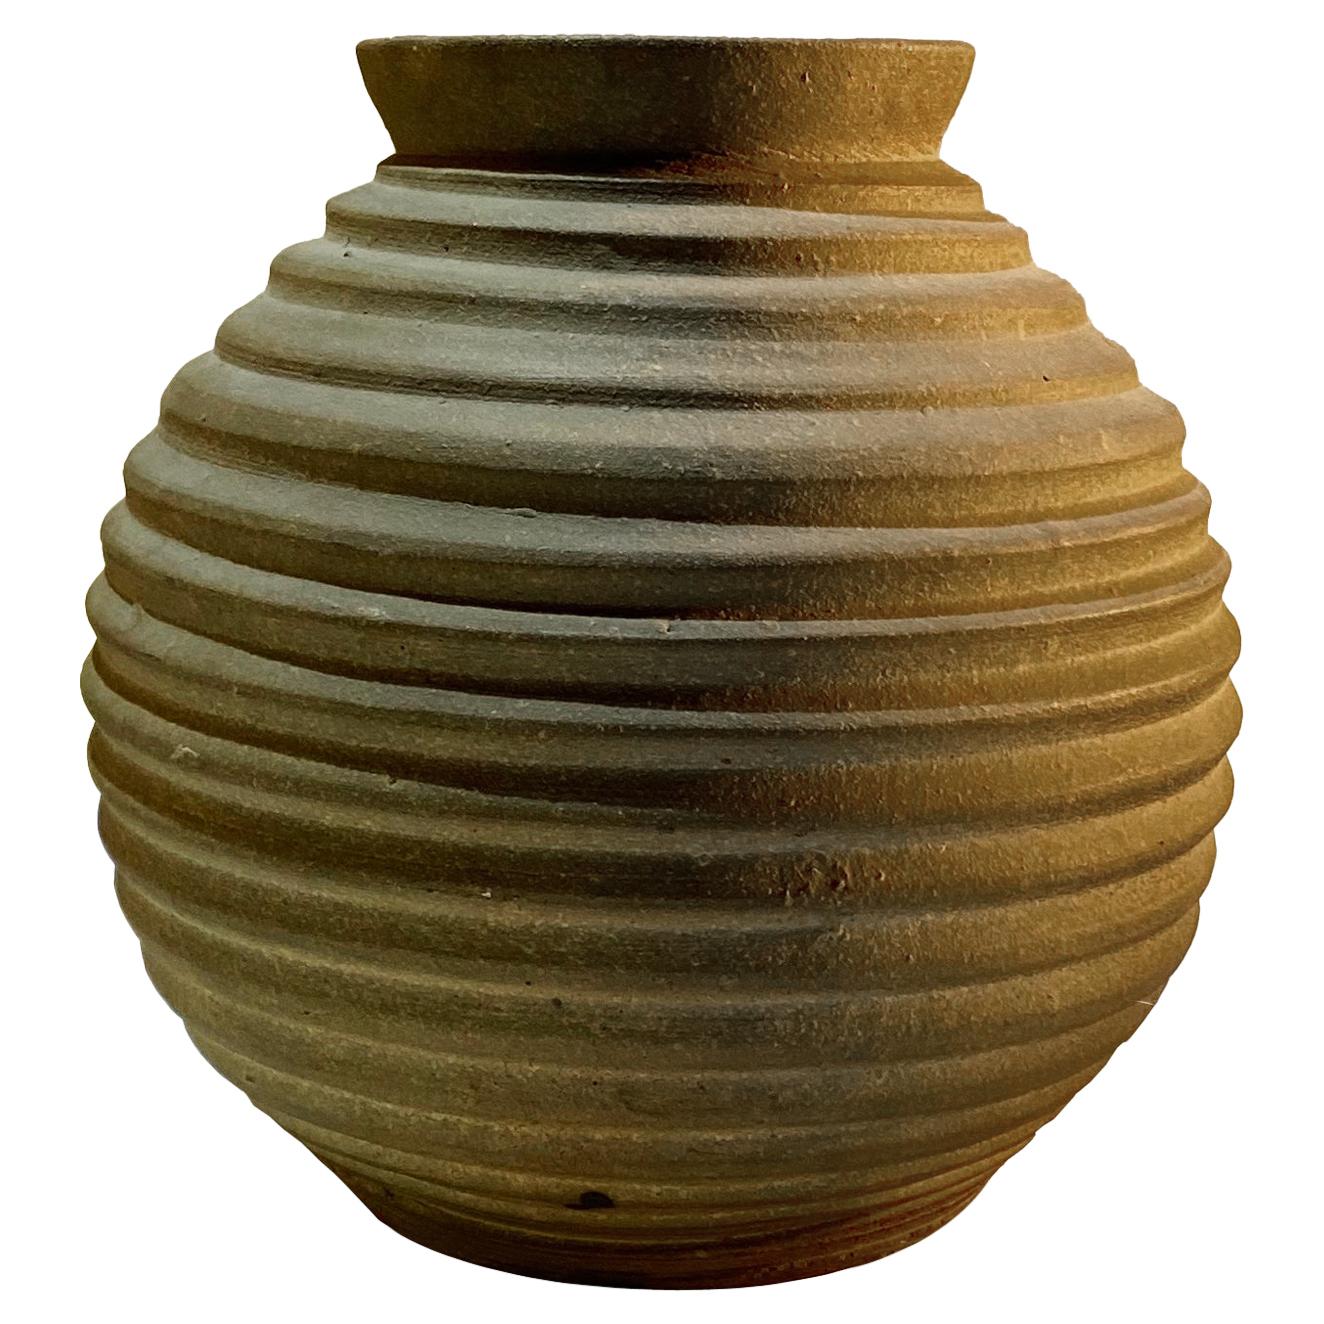 Art Deco Period Ribbed Raw Ceramic Vase, Hungary, 1930s For Sale